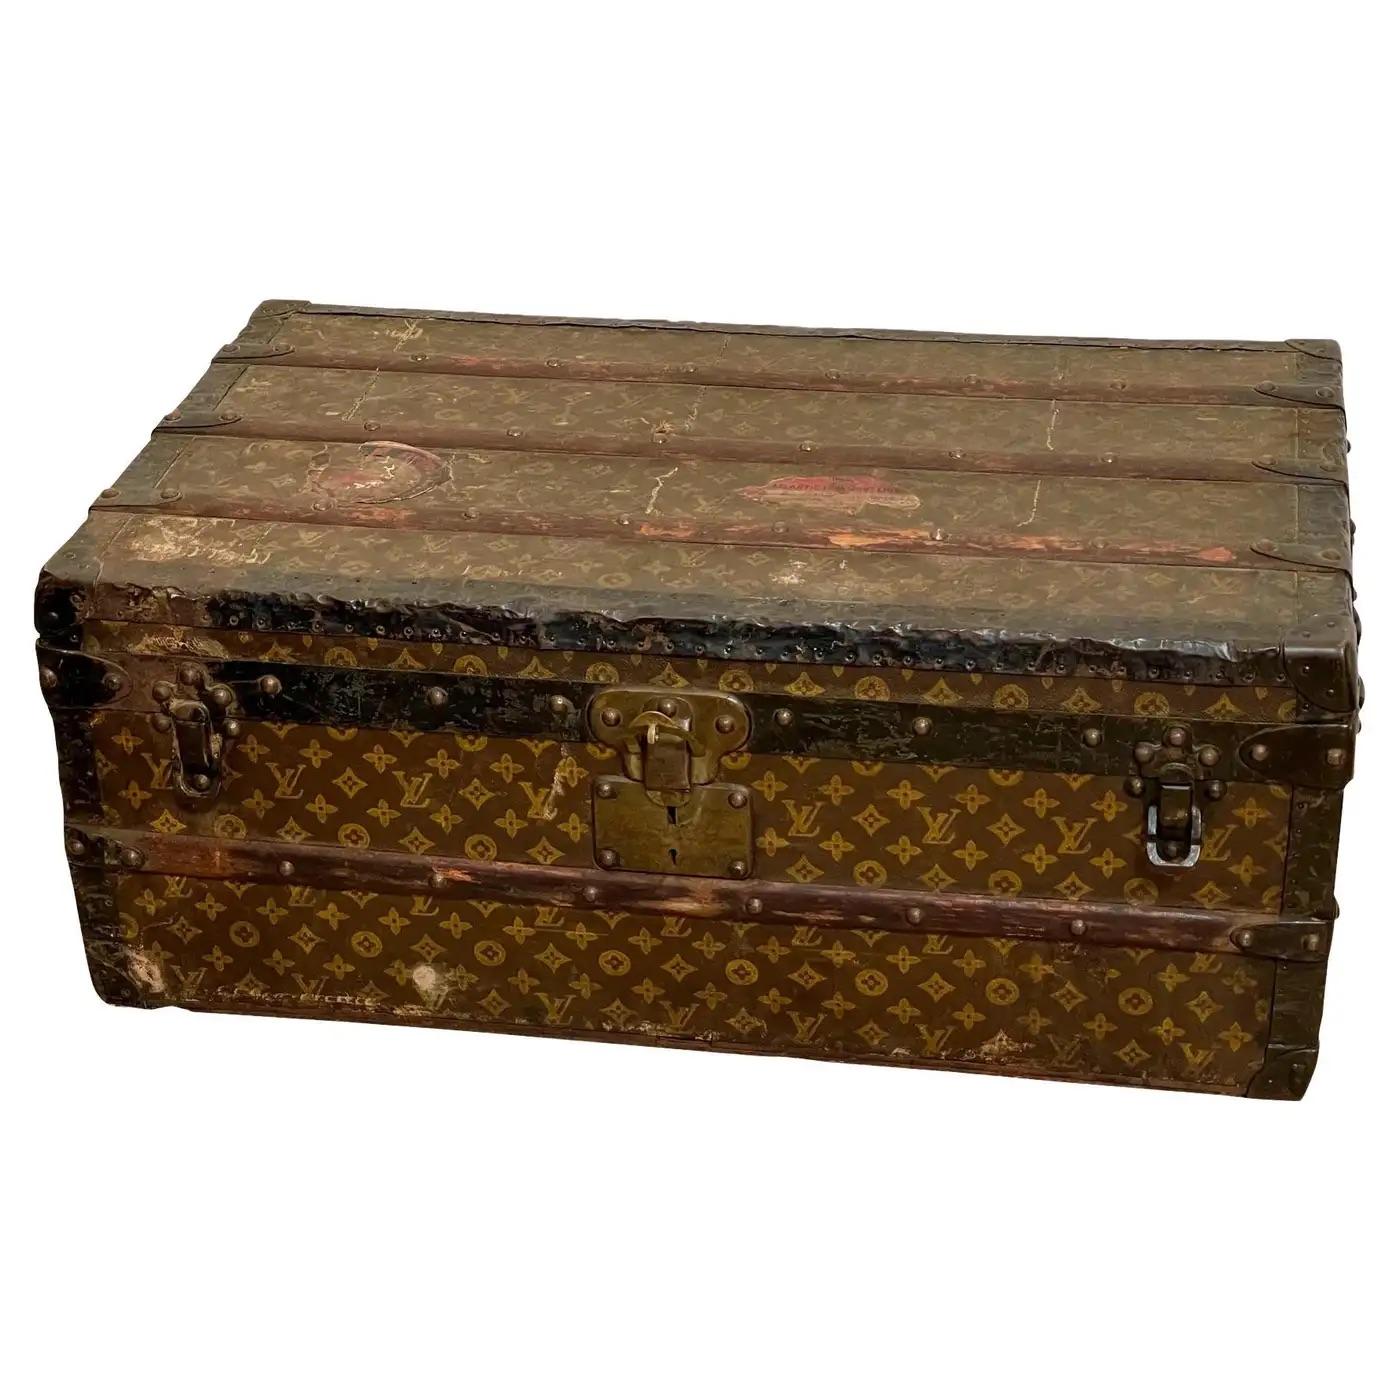 Early Louis Vuitton Steamer Trunk, C. 1910 For Sale 2